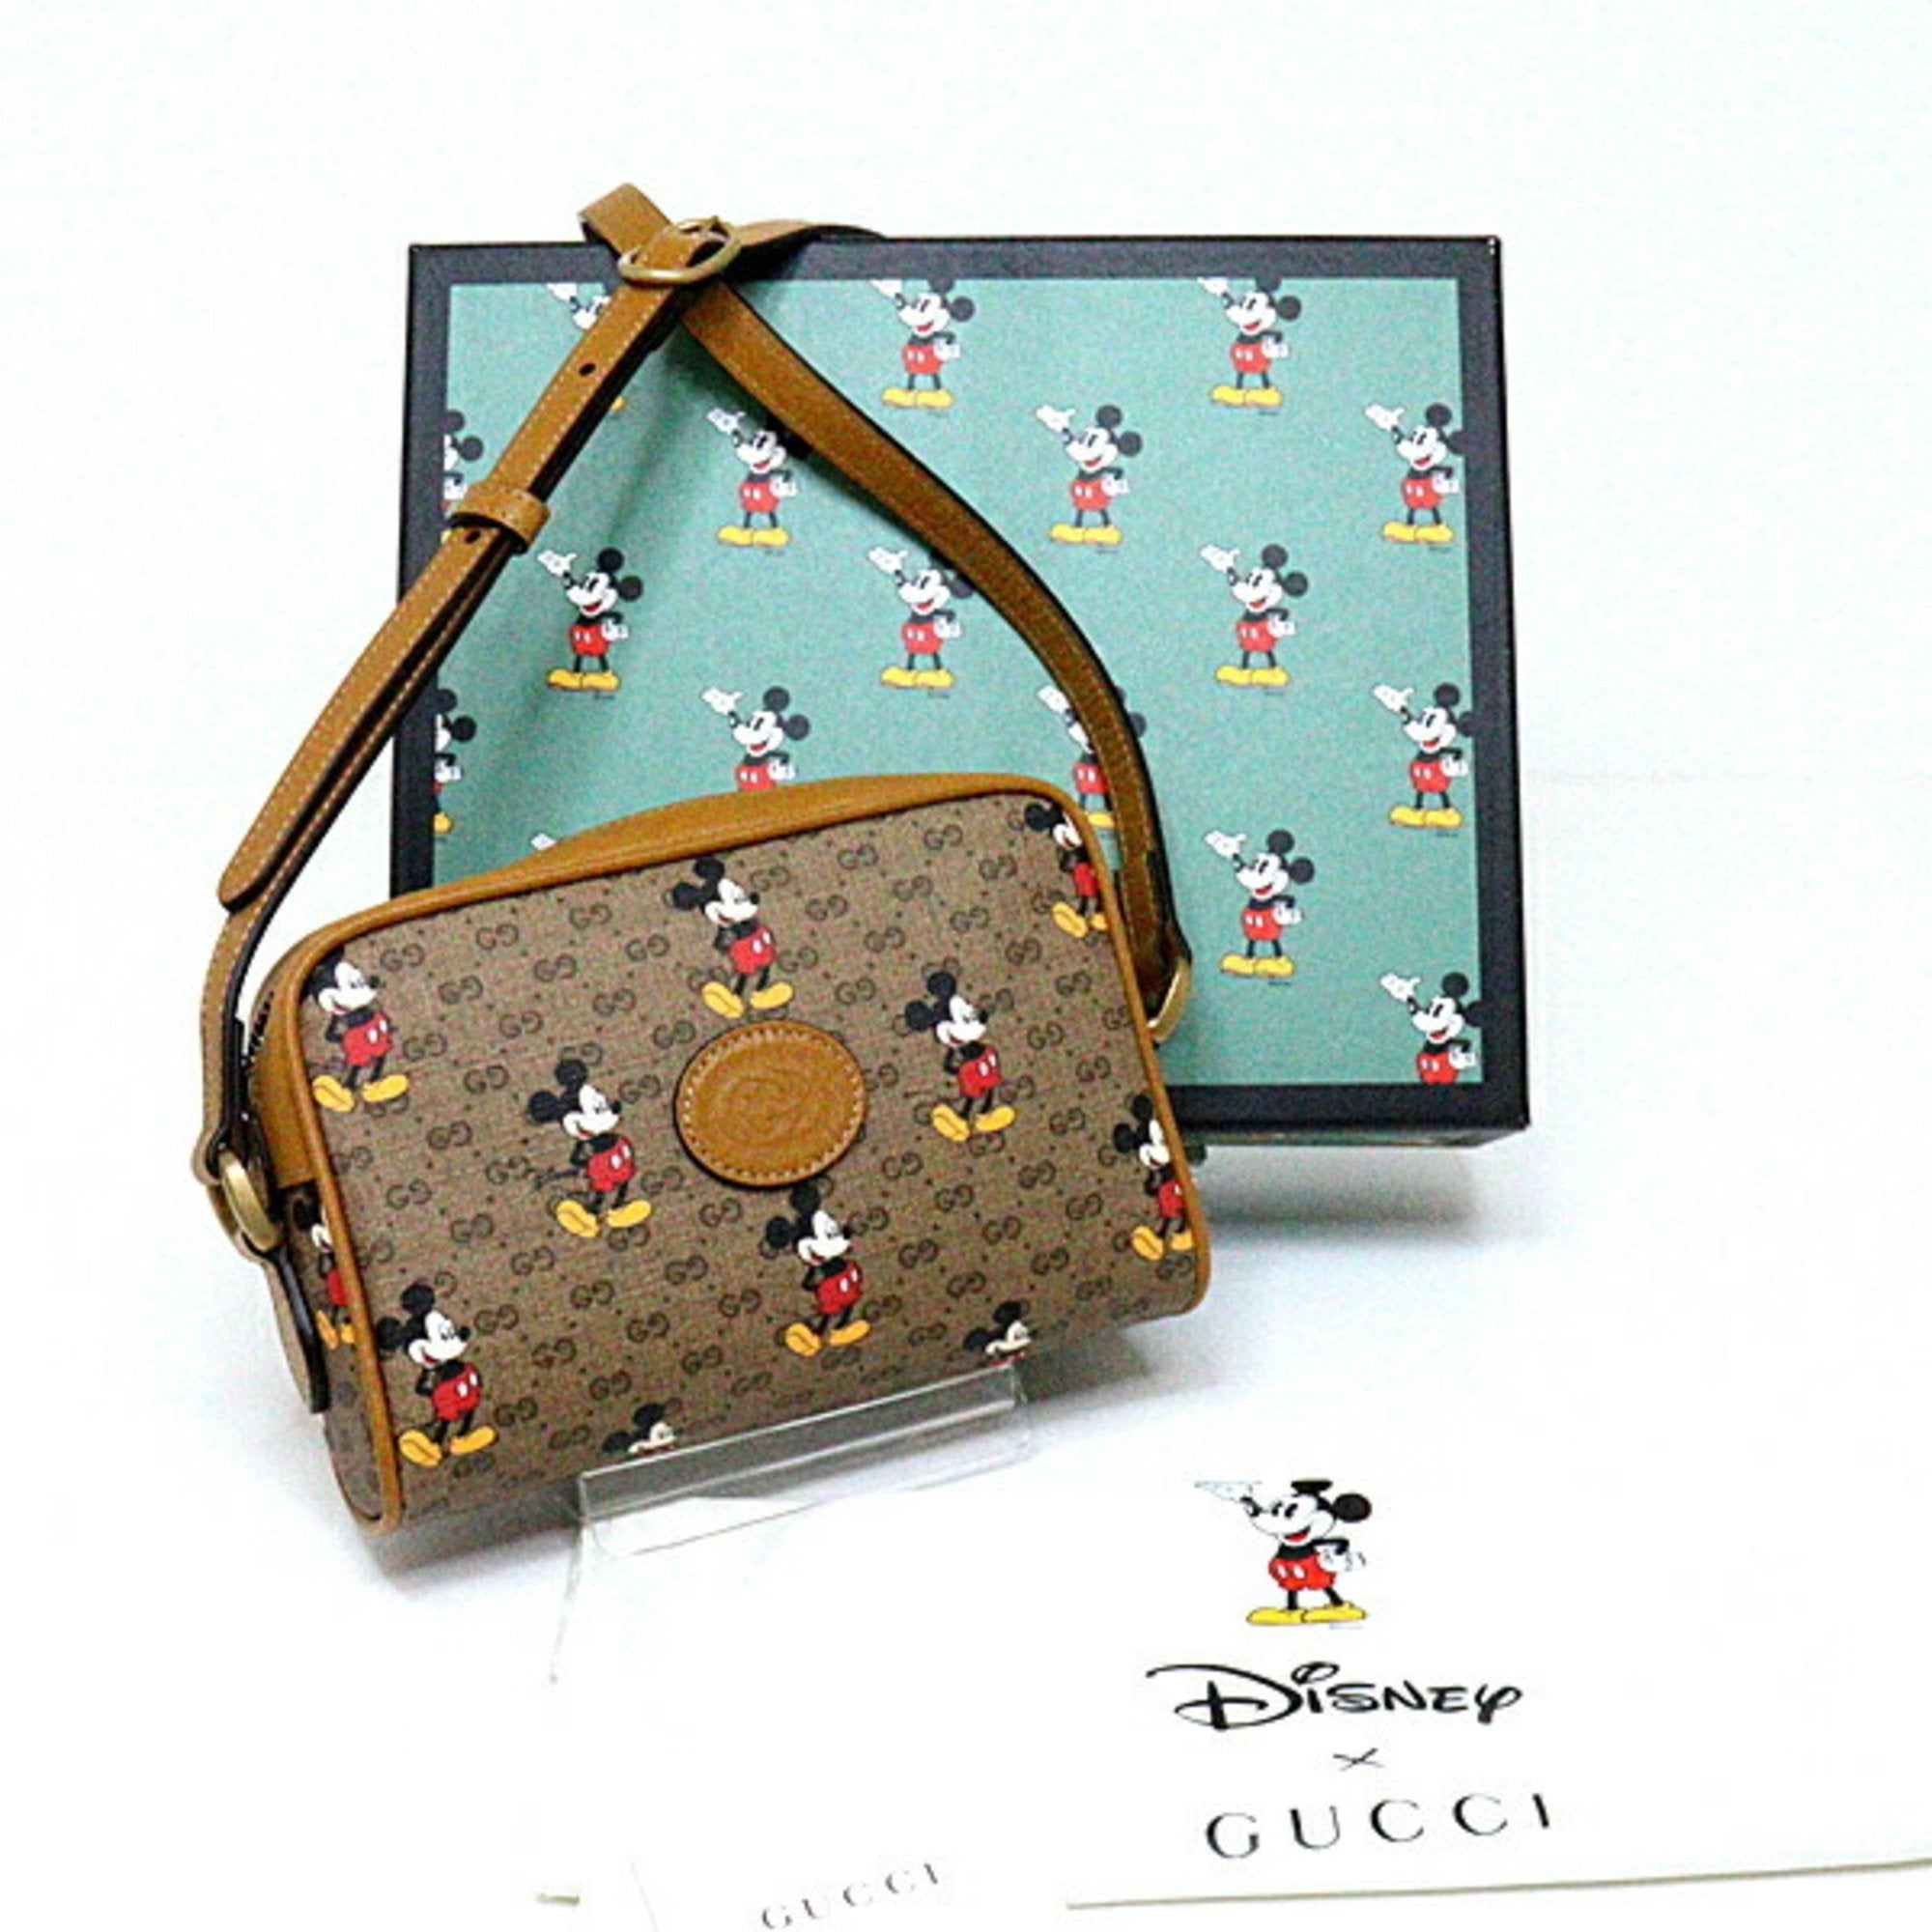 Gucci shoulder bag DISNEY x GUCCI Mickey Mouse collaboration 602536 be